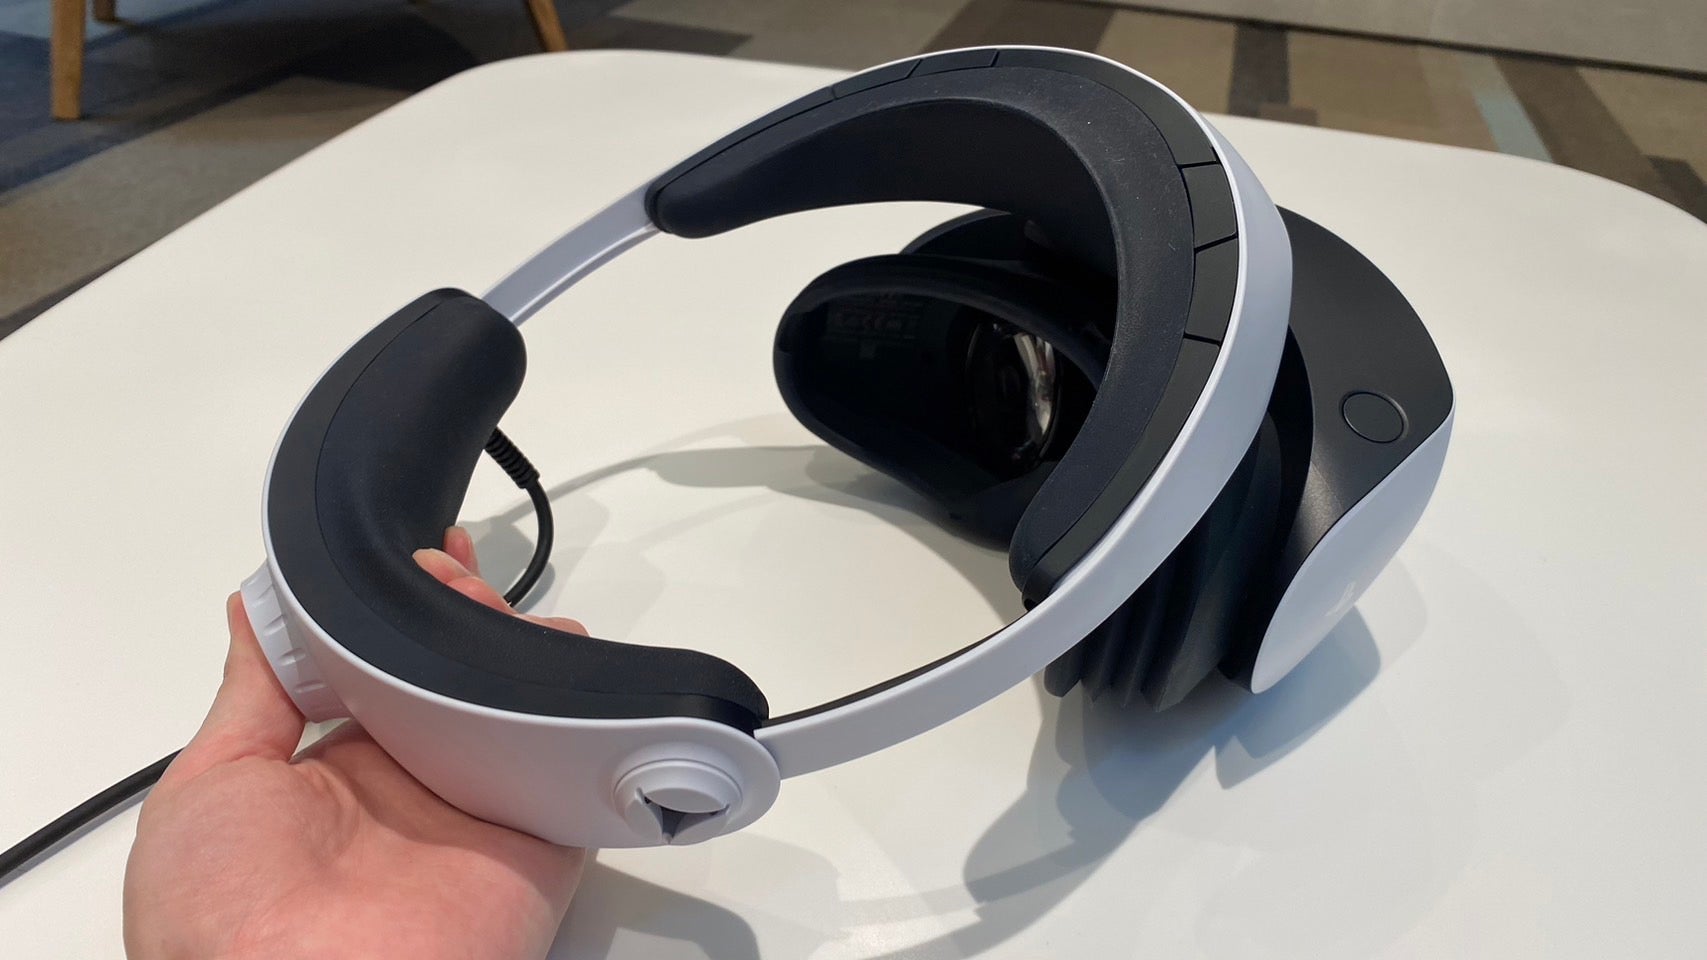 The Sony PSVR 2 halo strap being extended (Photo: Michelle Ehrhardt / Gizmodo)